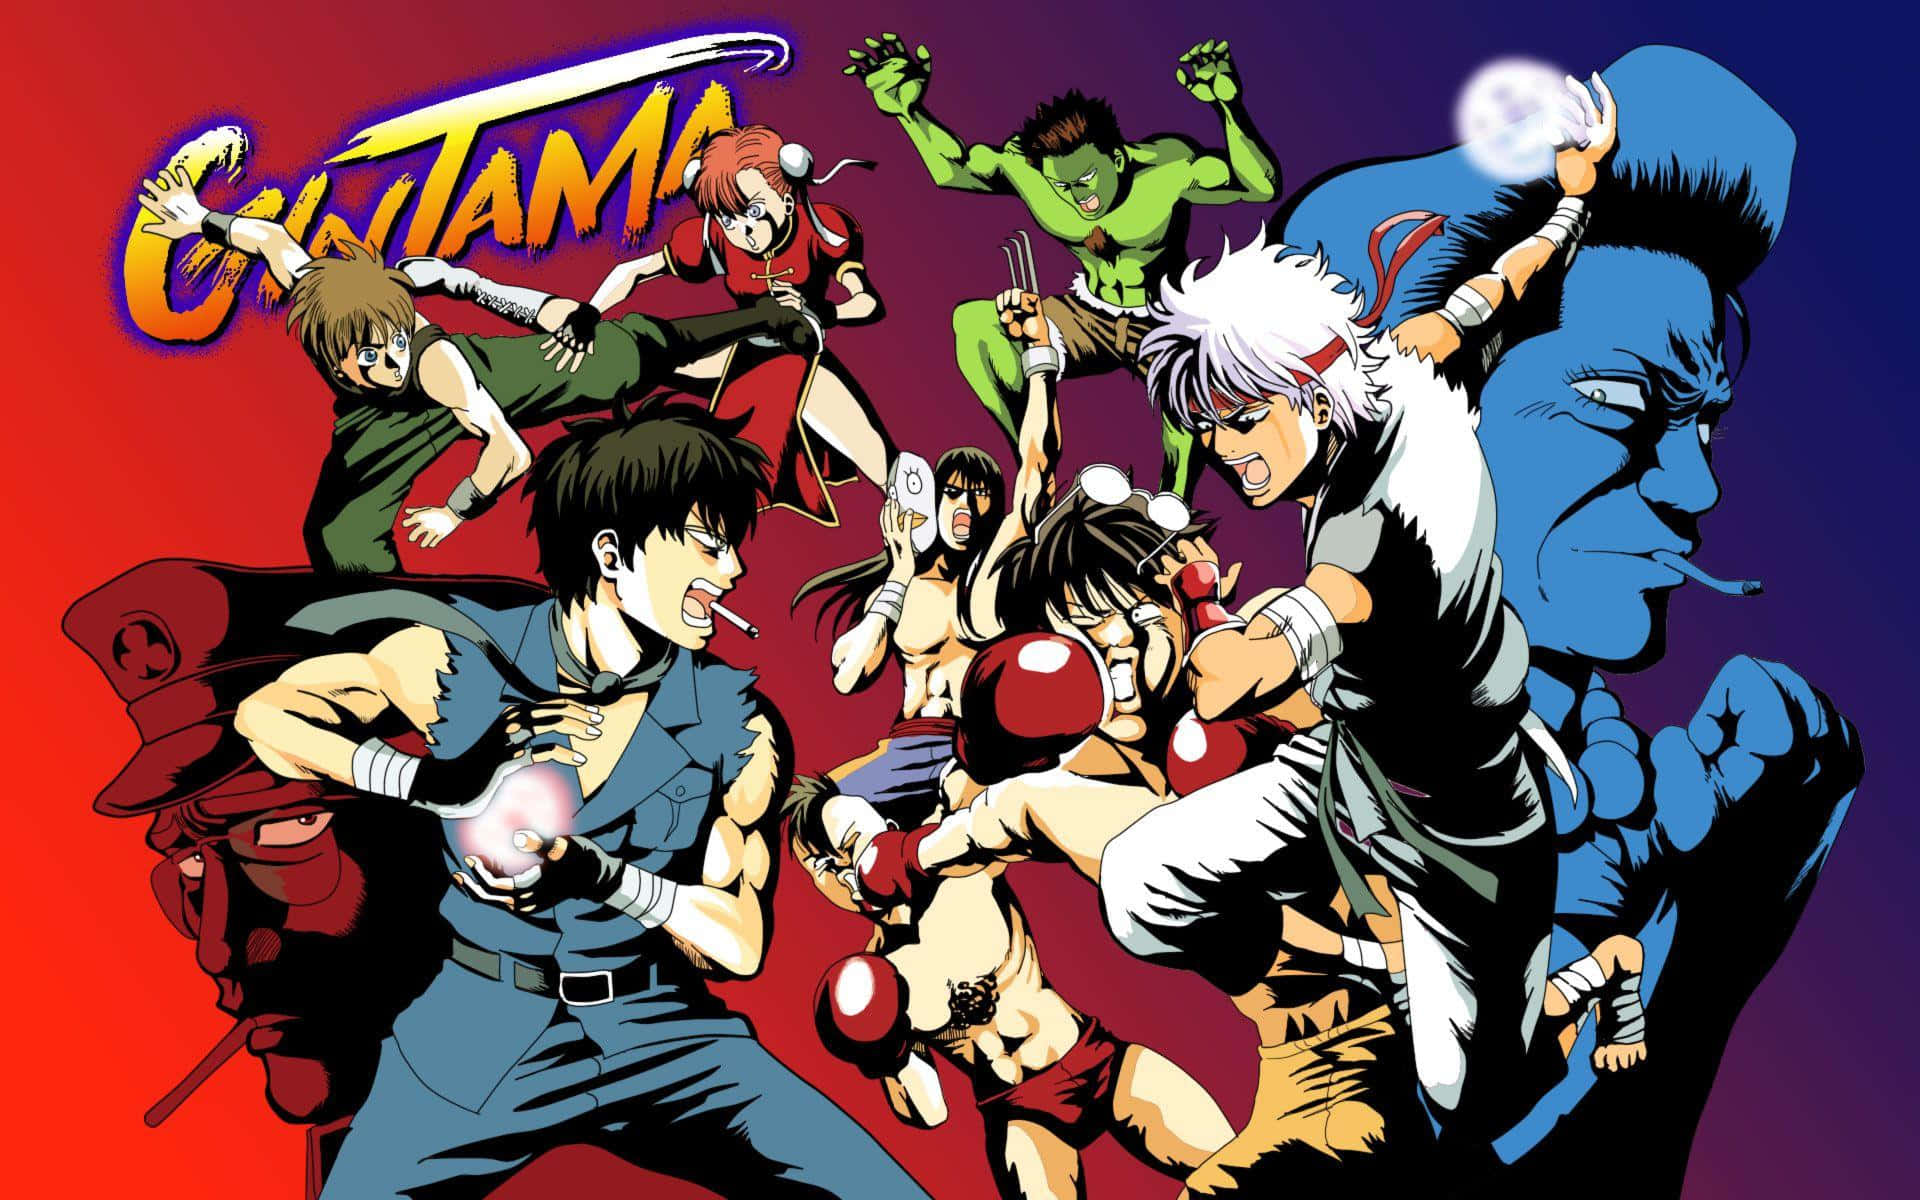 Experience the hilarious adventures of Gintama!